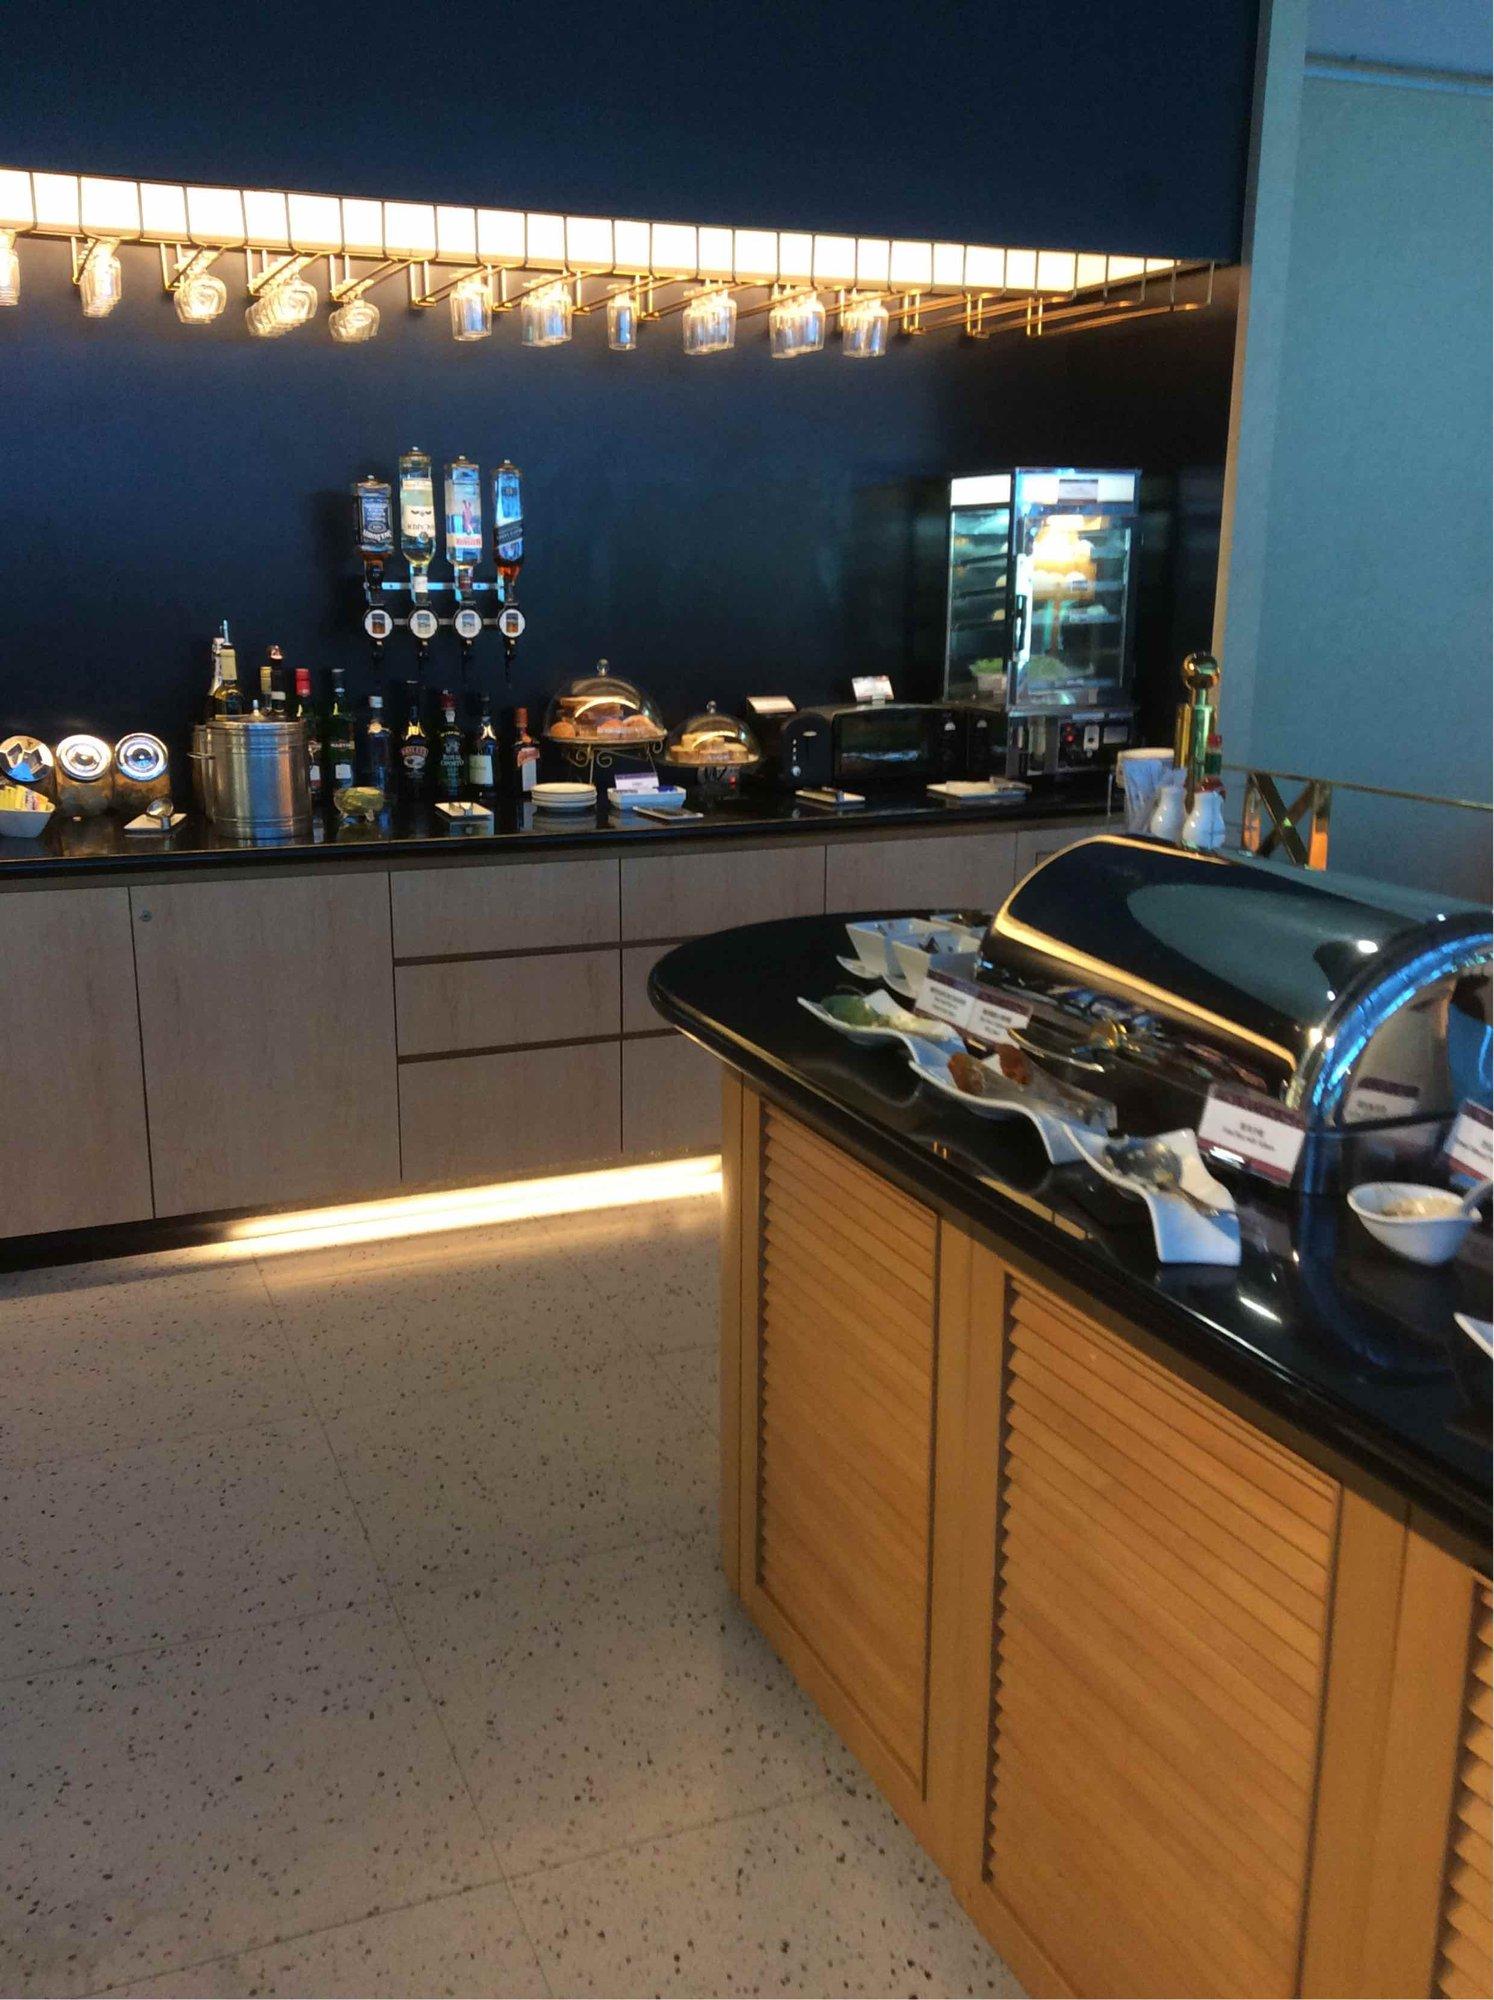 Singapore Airlines SilverKris Business Class Lounge image 8 of 14